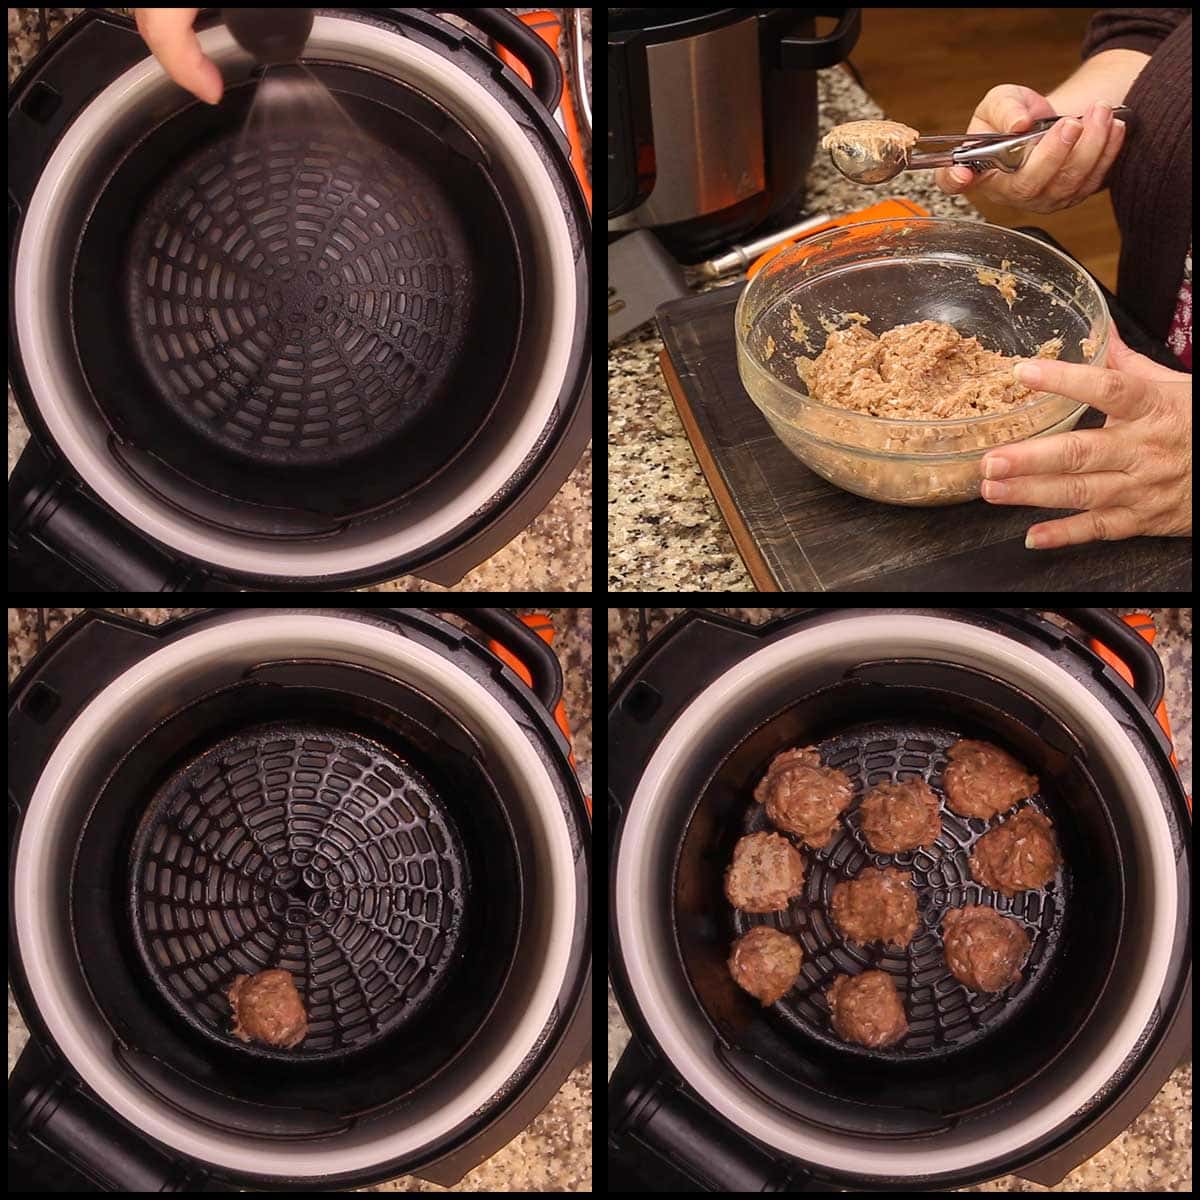 forming meatballs and placing them in the basket